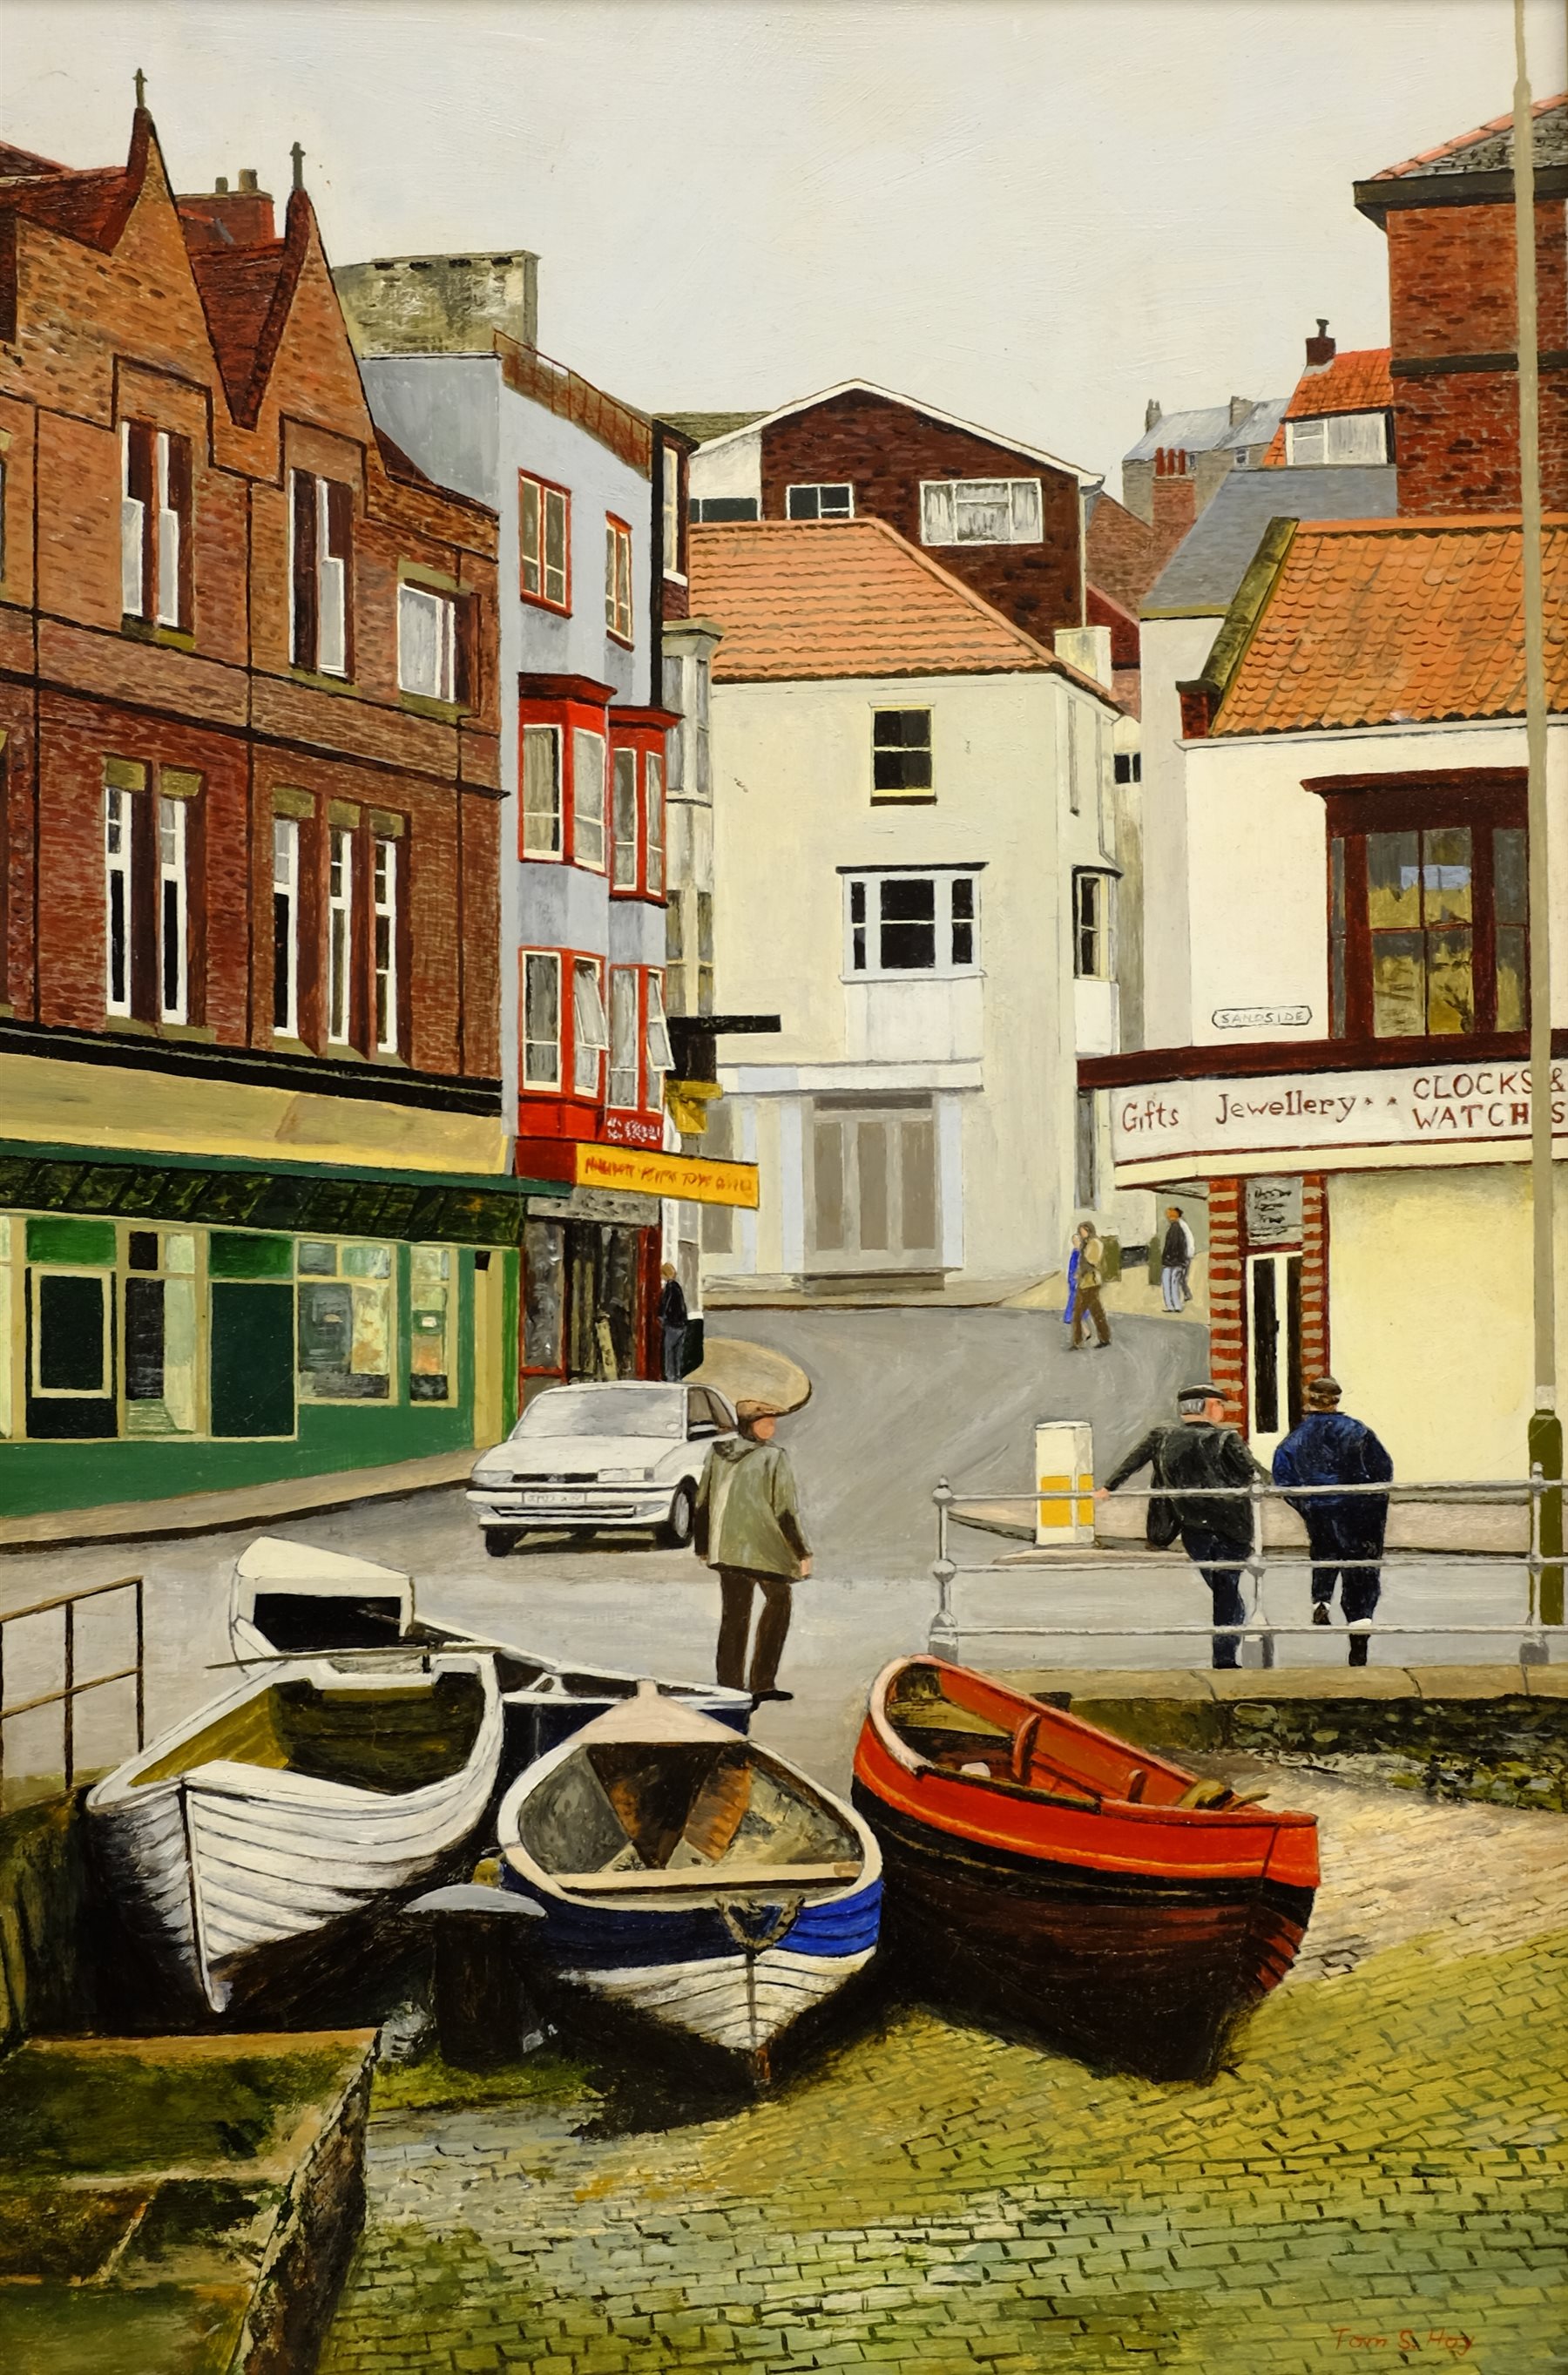 Tom S Hoy (British 20th century): 'Sandside' Scarborough, acrylic on board signed, titled verso 45cm